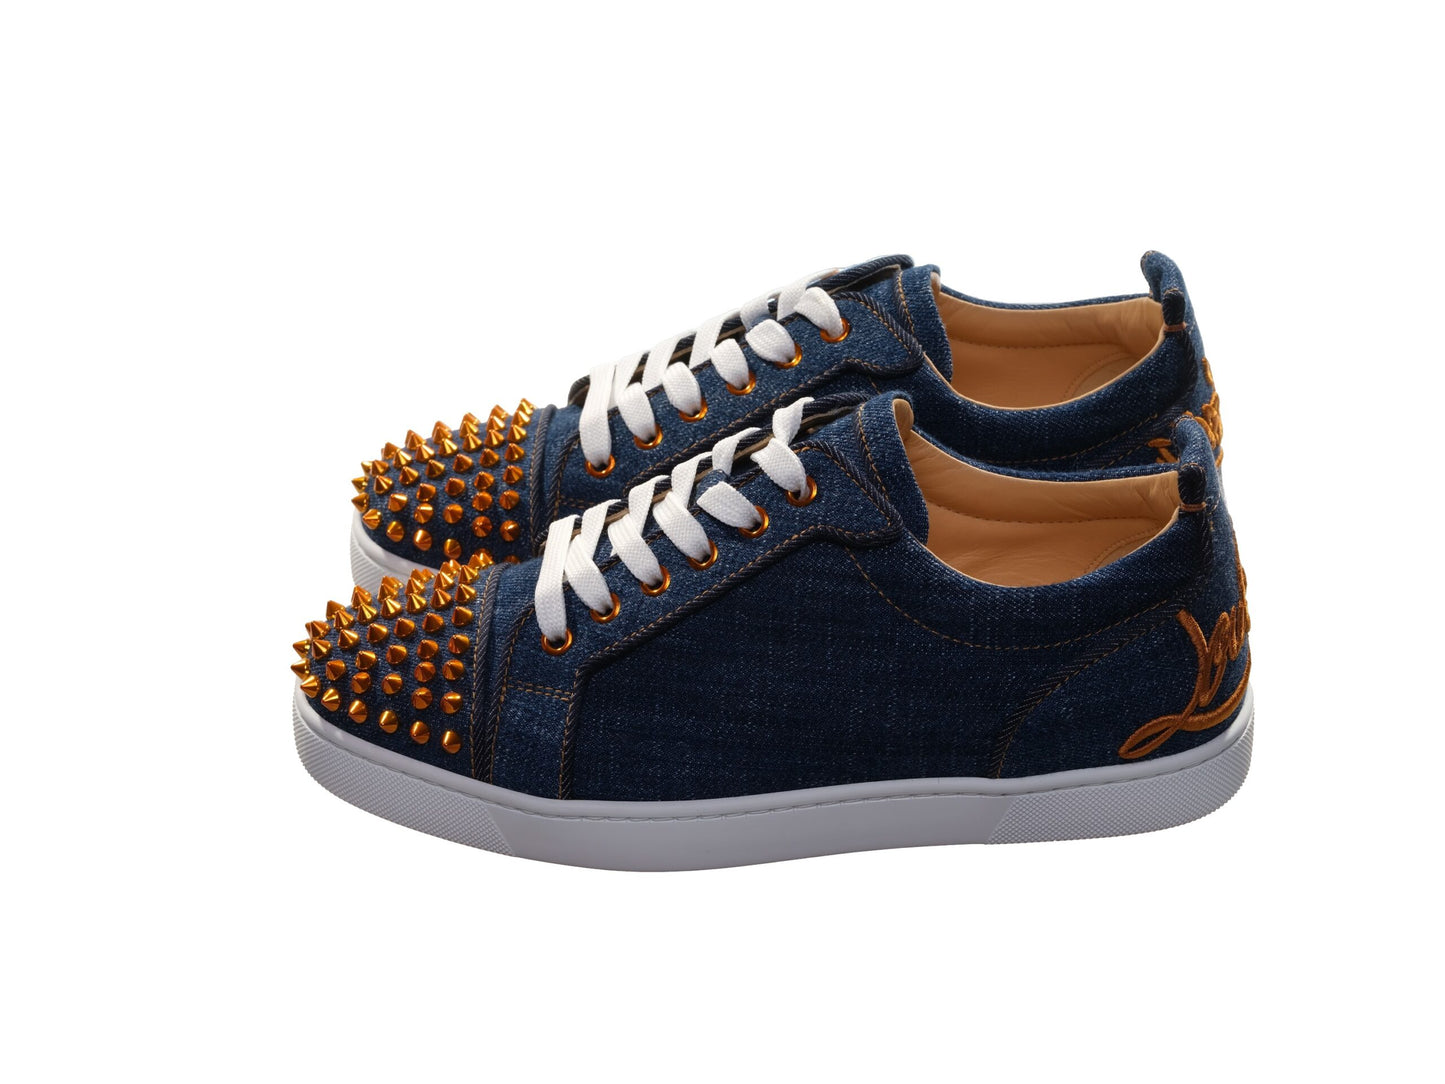 Fun Louis Junior Spikes Flat Denim and Gold Spike Sneakers